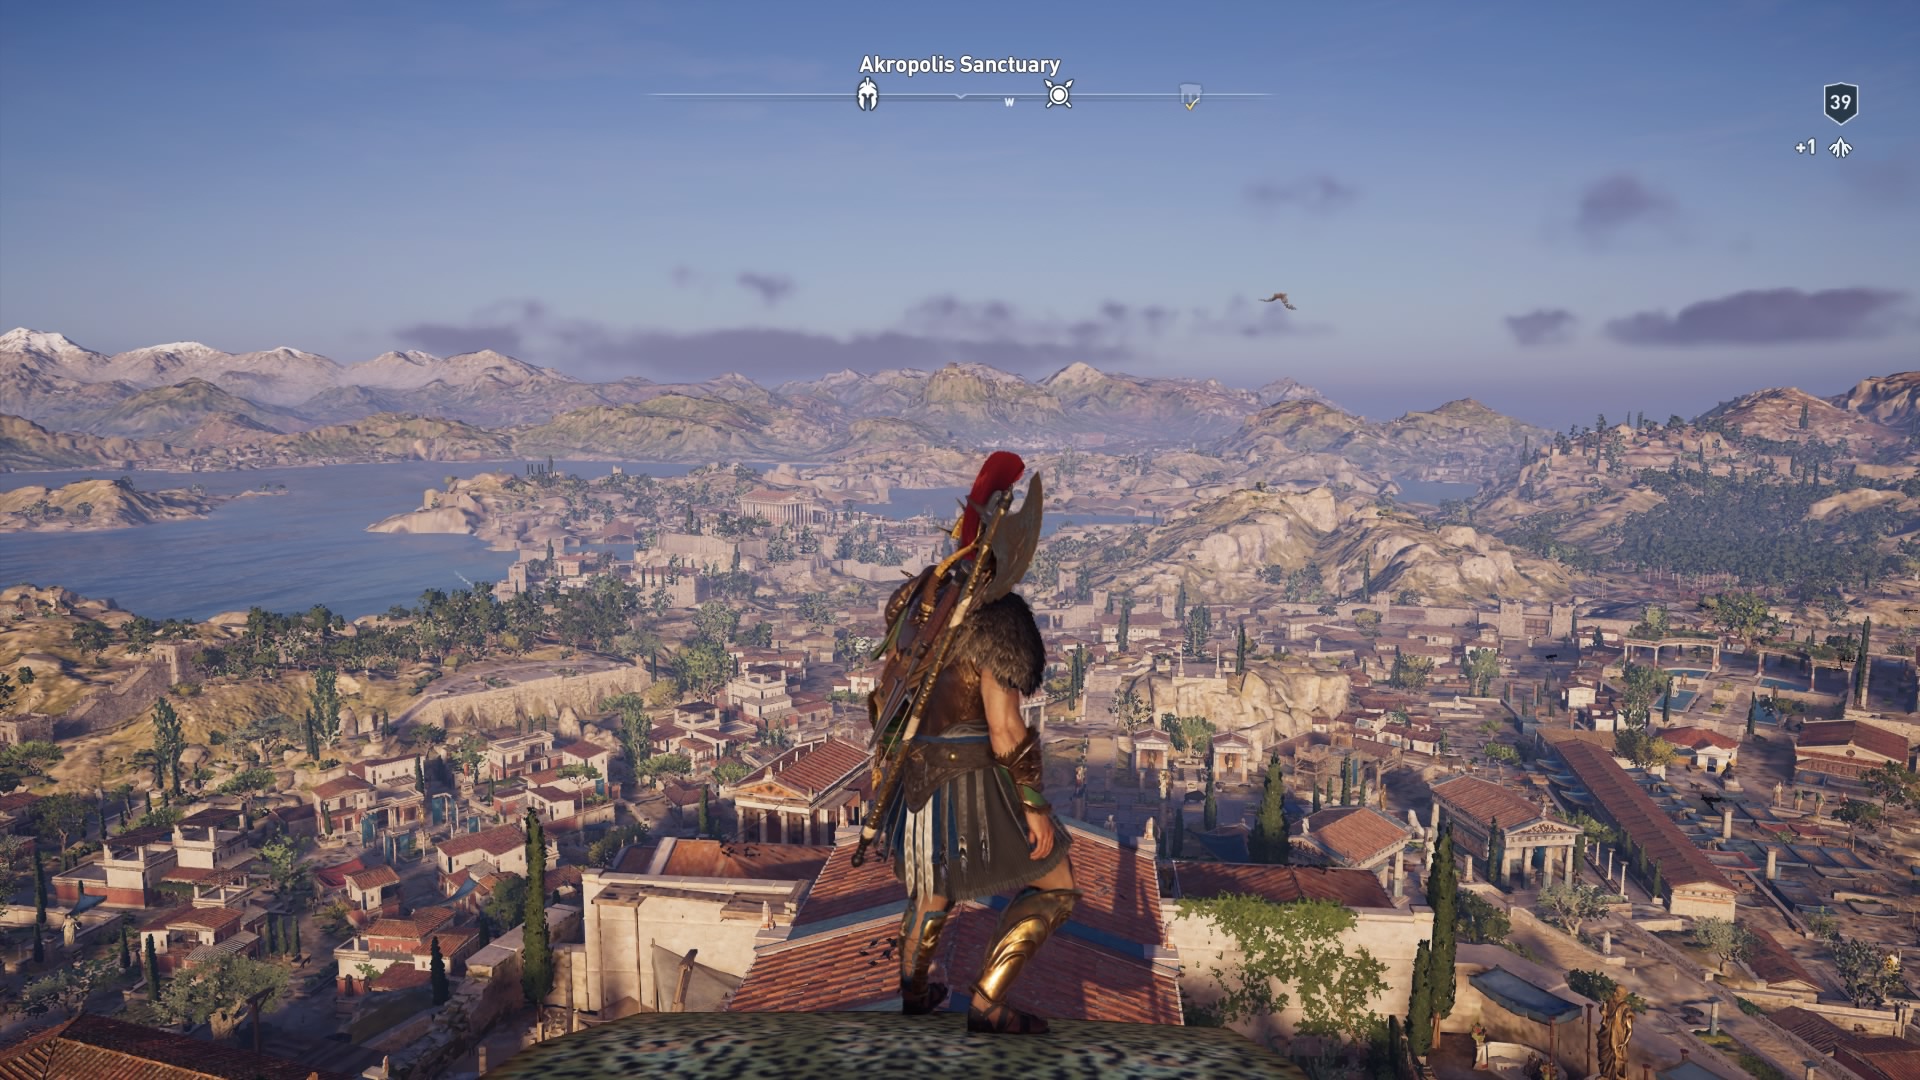 Assassin's Creed Infinity: Platforms & everything we know - Dexerto